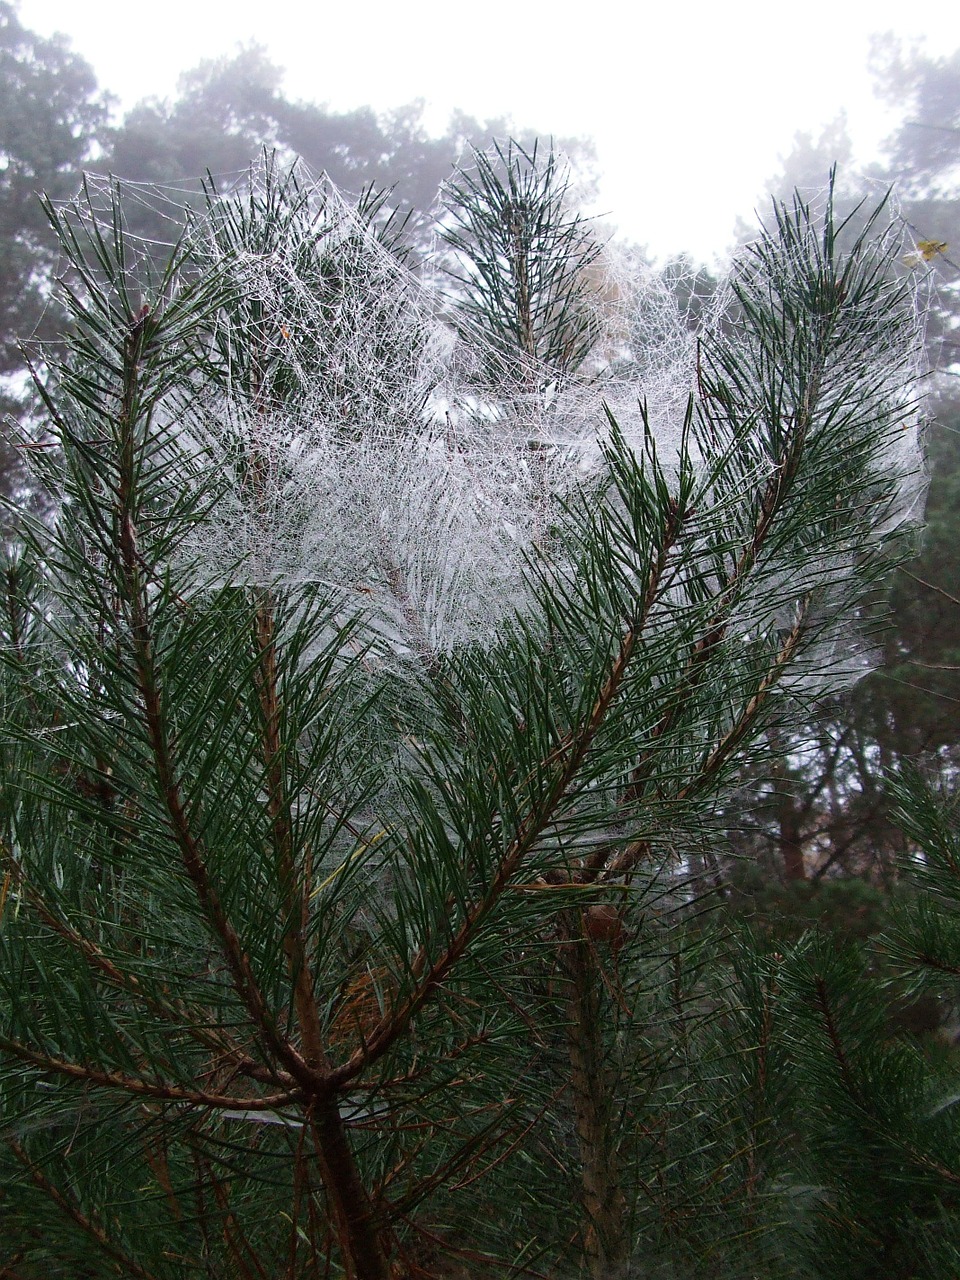 Pine,spider webs,feenschleier,november,free pictures - free image from ...